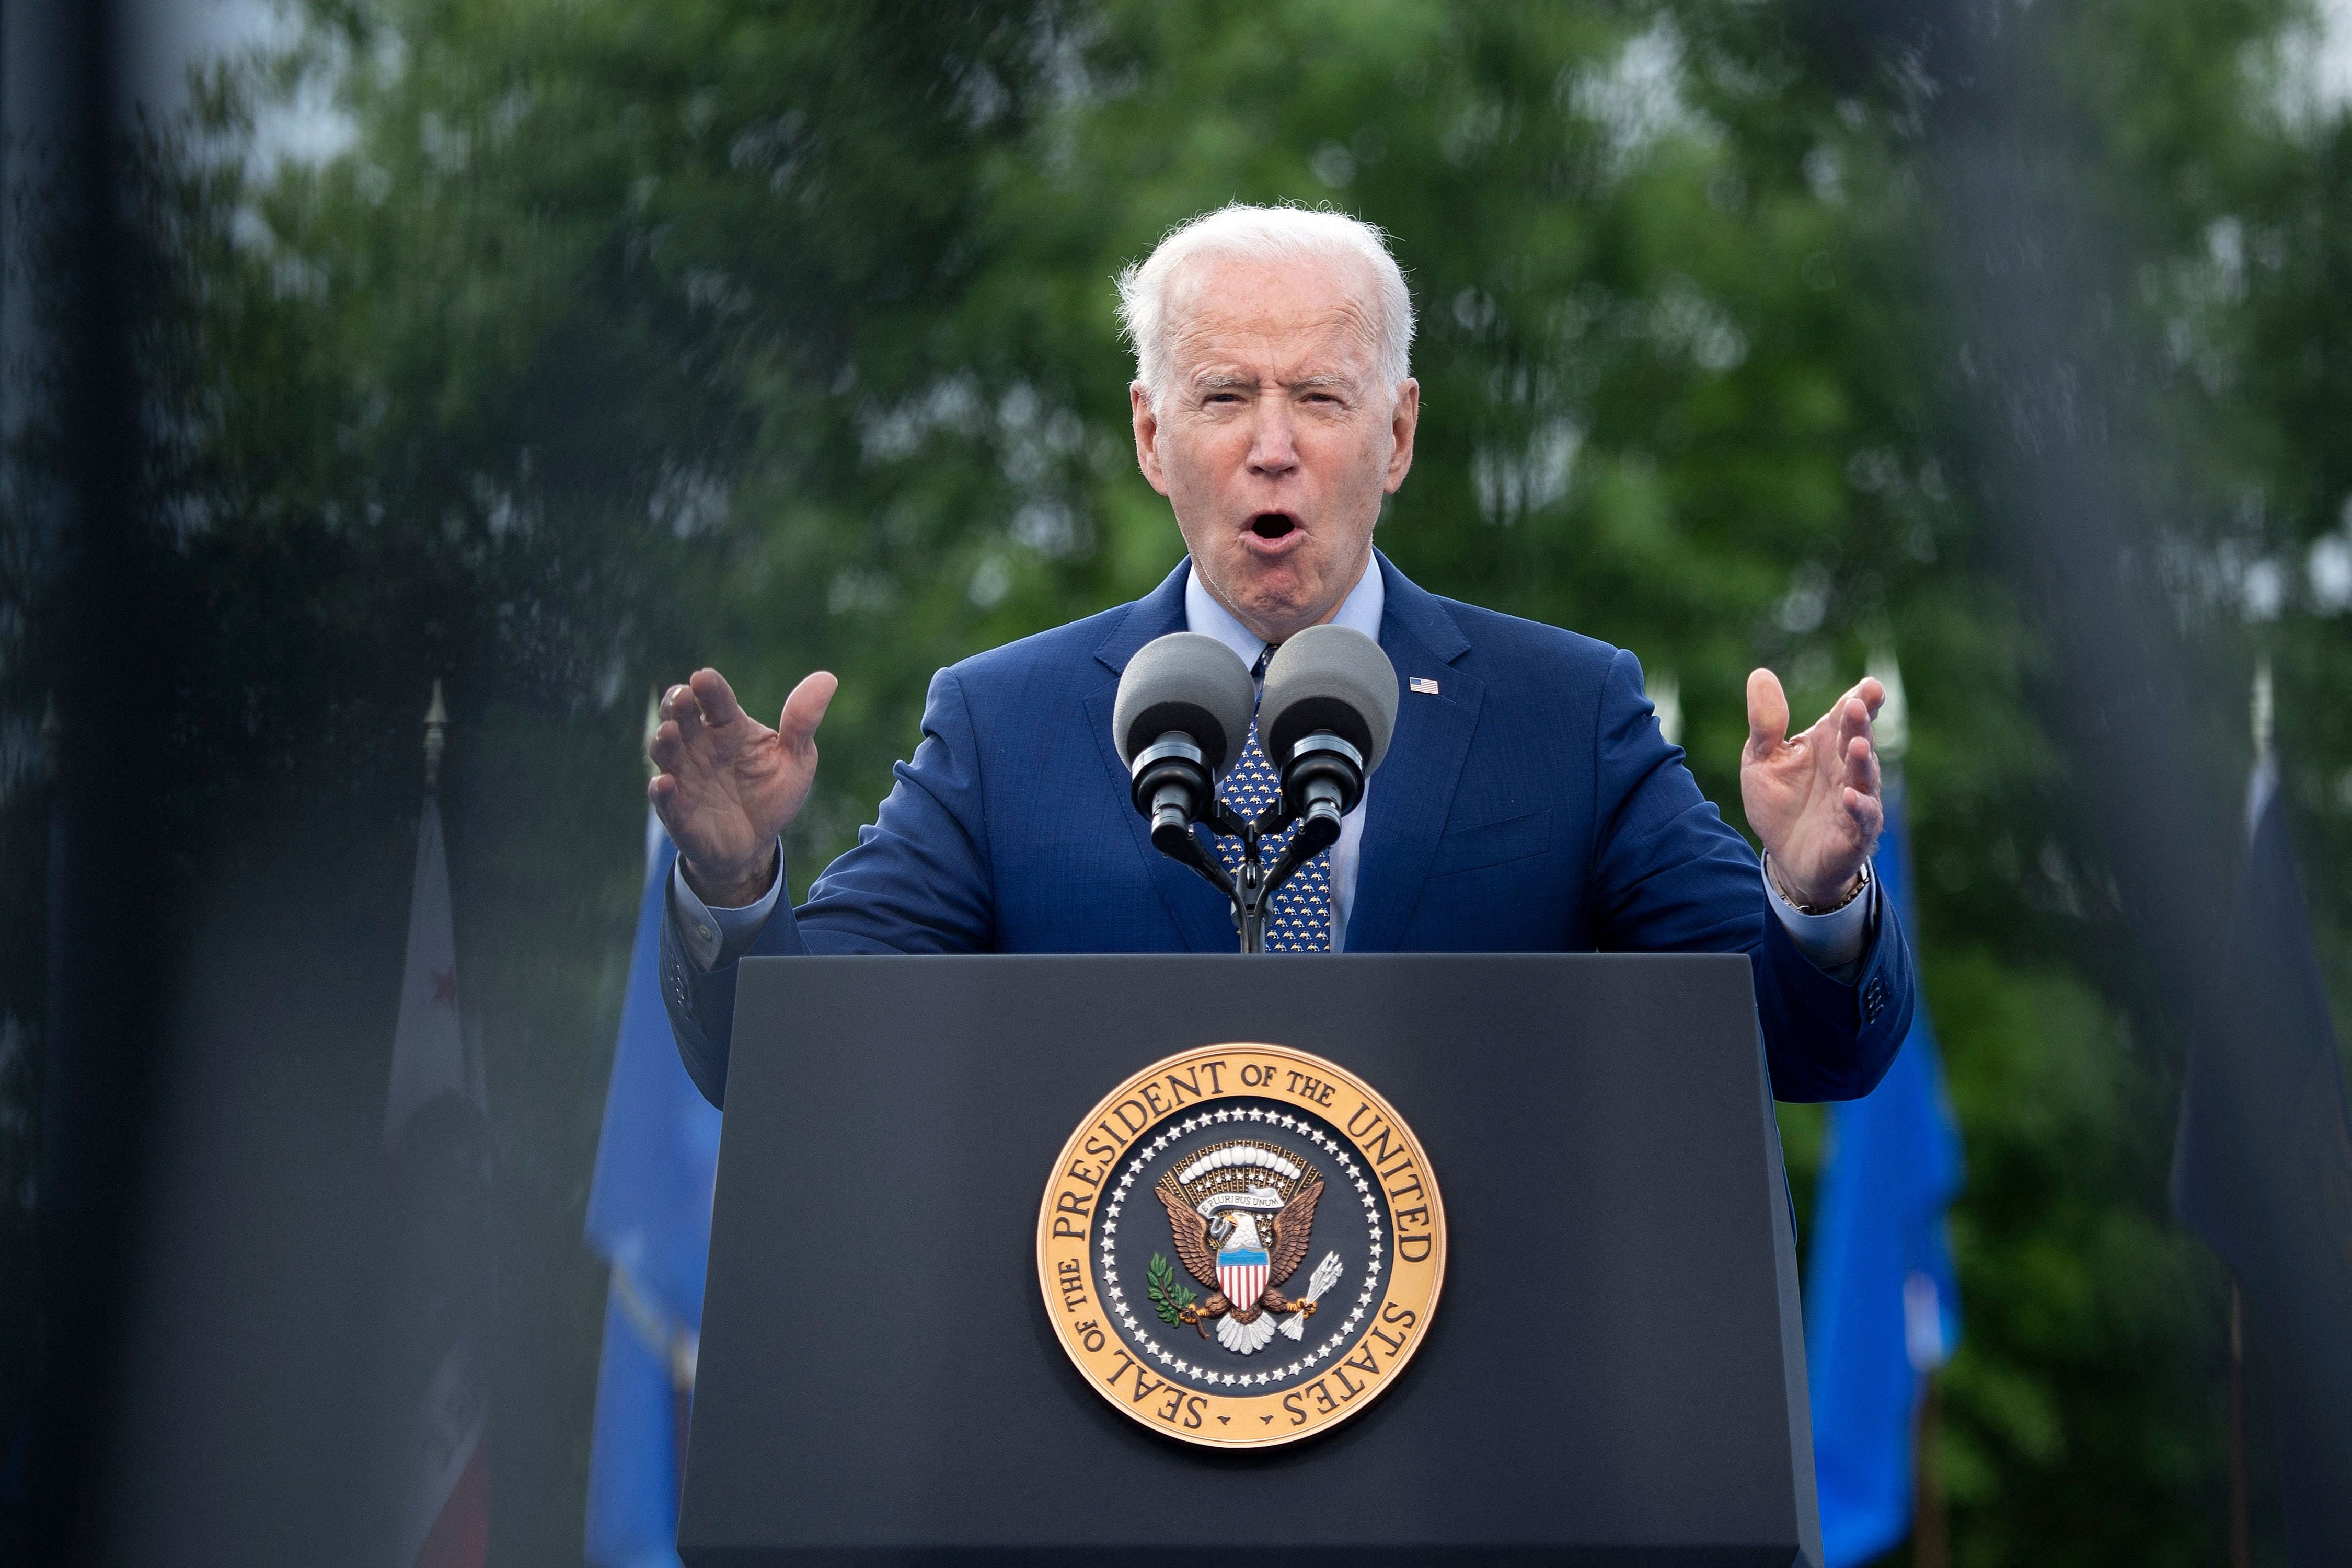 US President Joe Biden speaks during a drive-in rally at Infinite Energy Center April 29, 2021, in Duluth, Georgia, where she said that Stacey Abrams could be president “if she wanted”